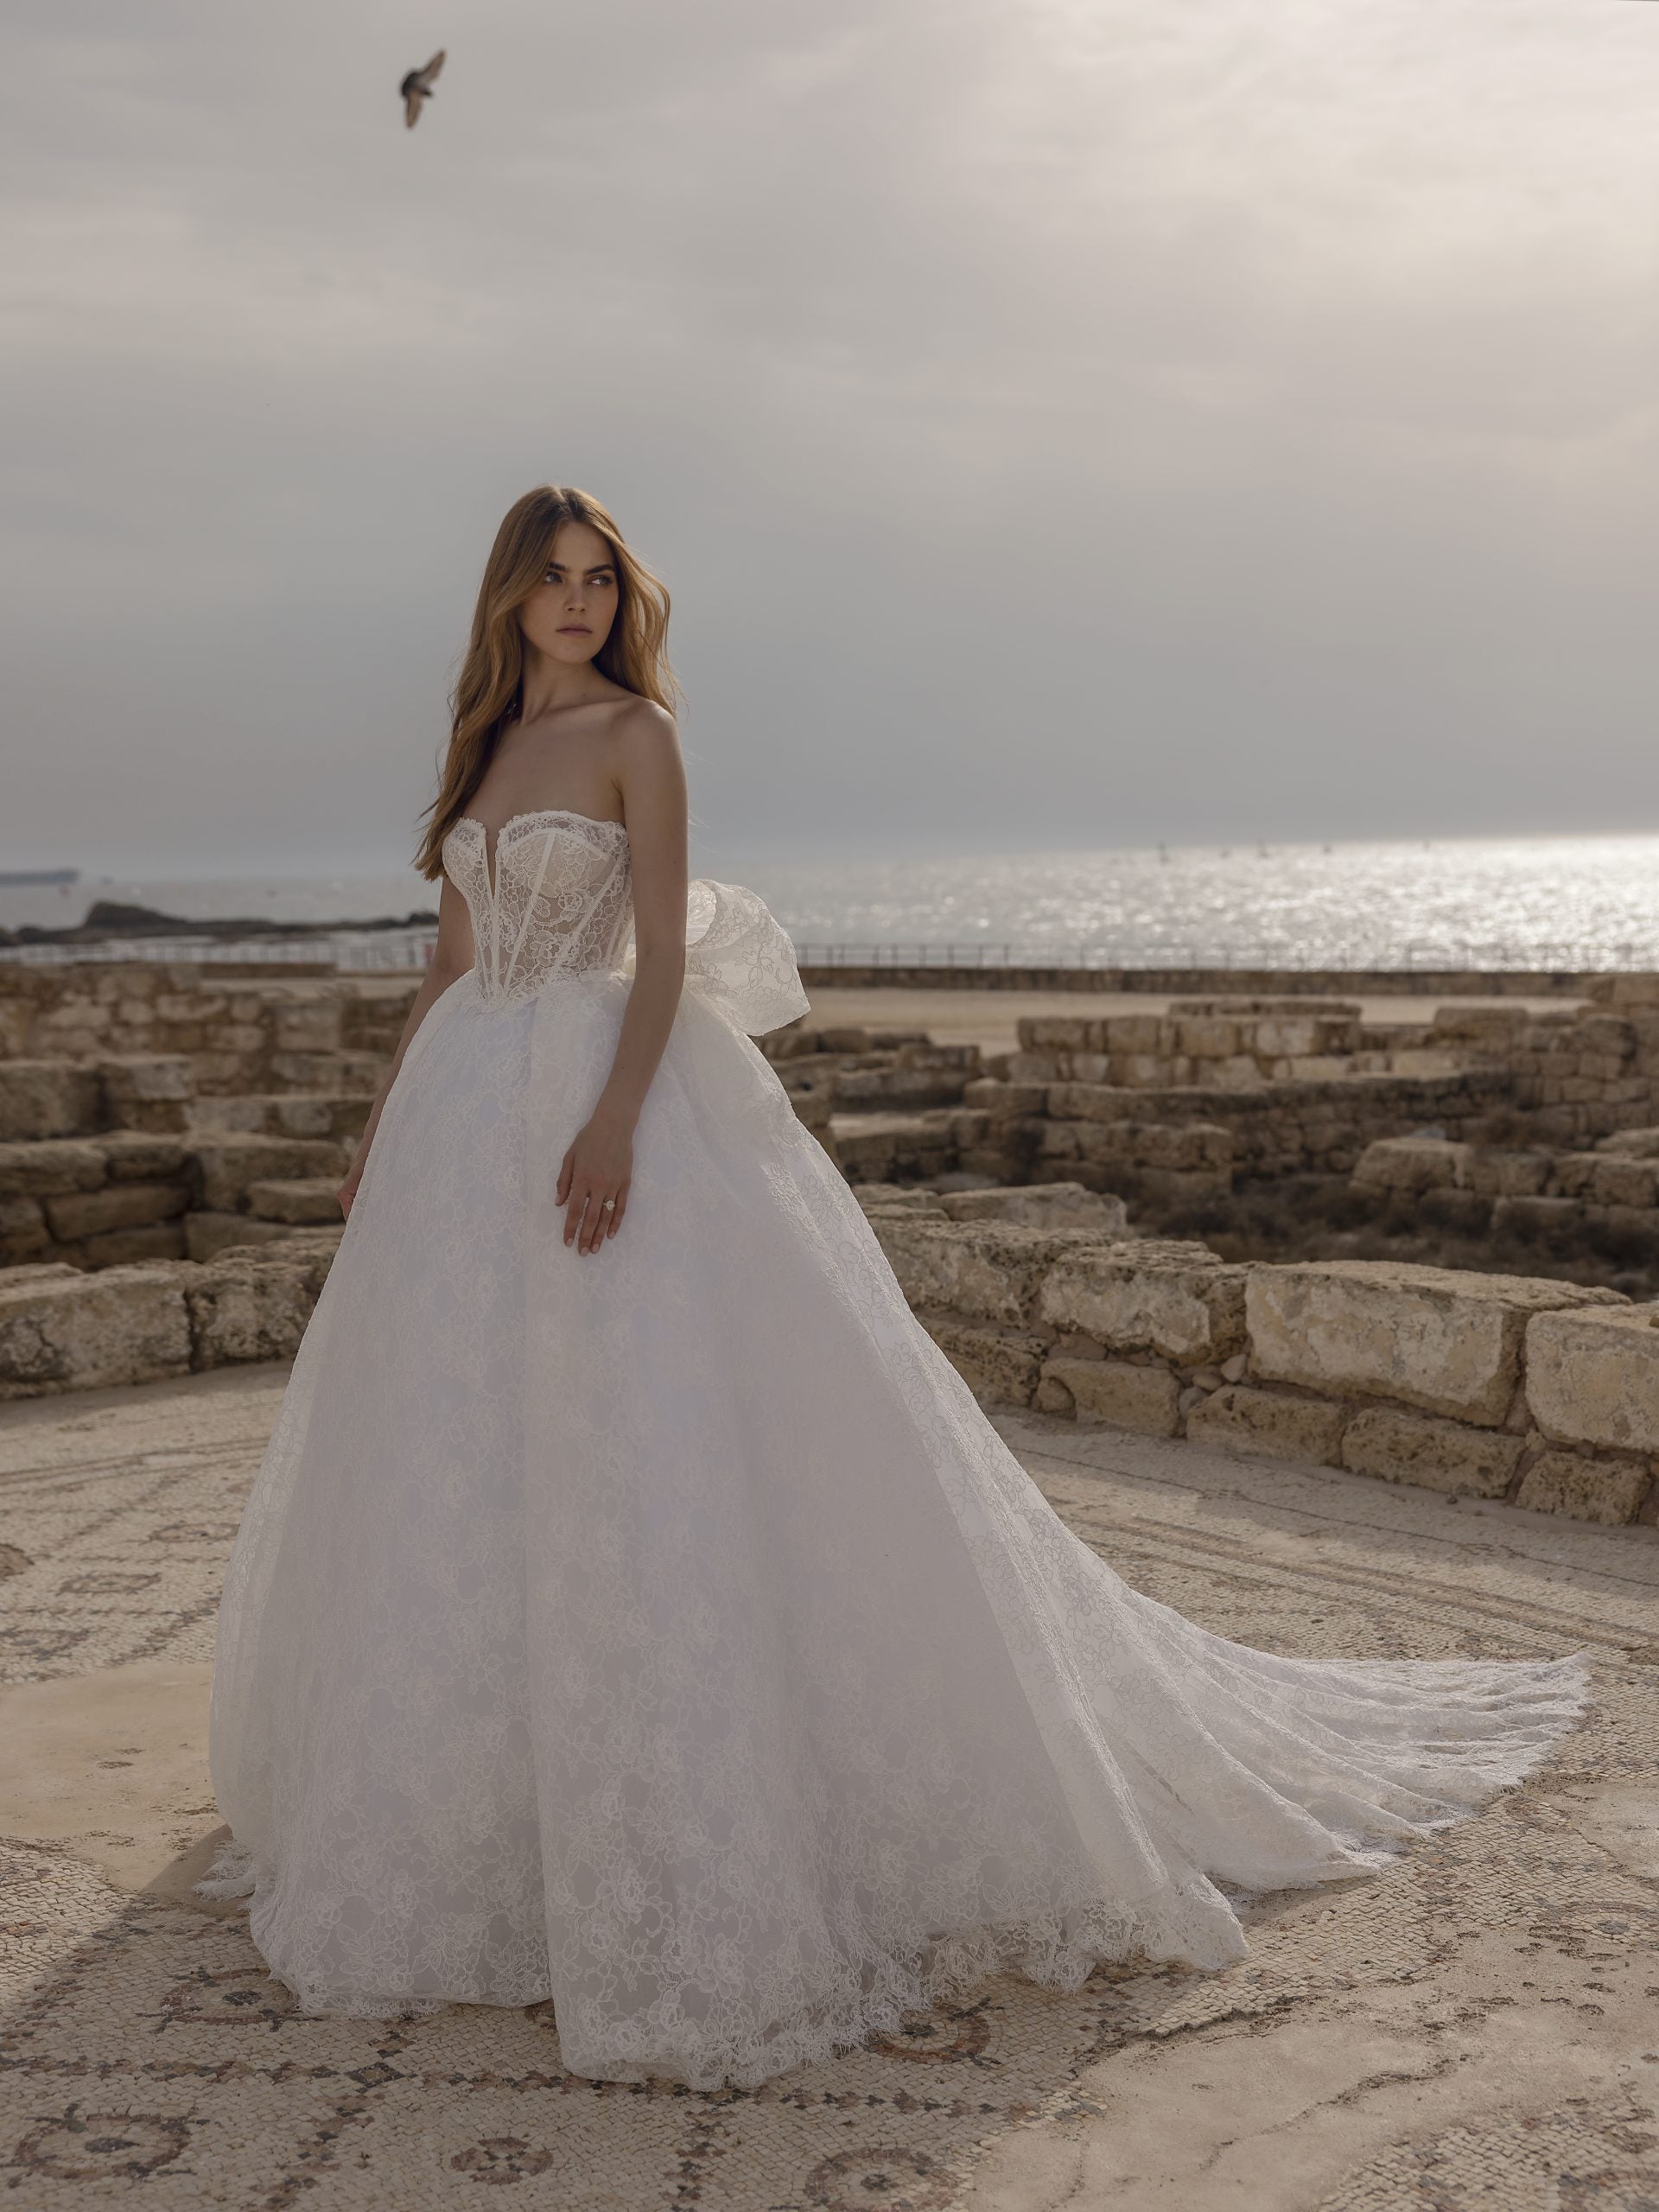 Lace Strapless Ball Gown Wedding Dress With Bow by Love by Pnina Tornai